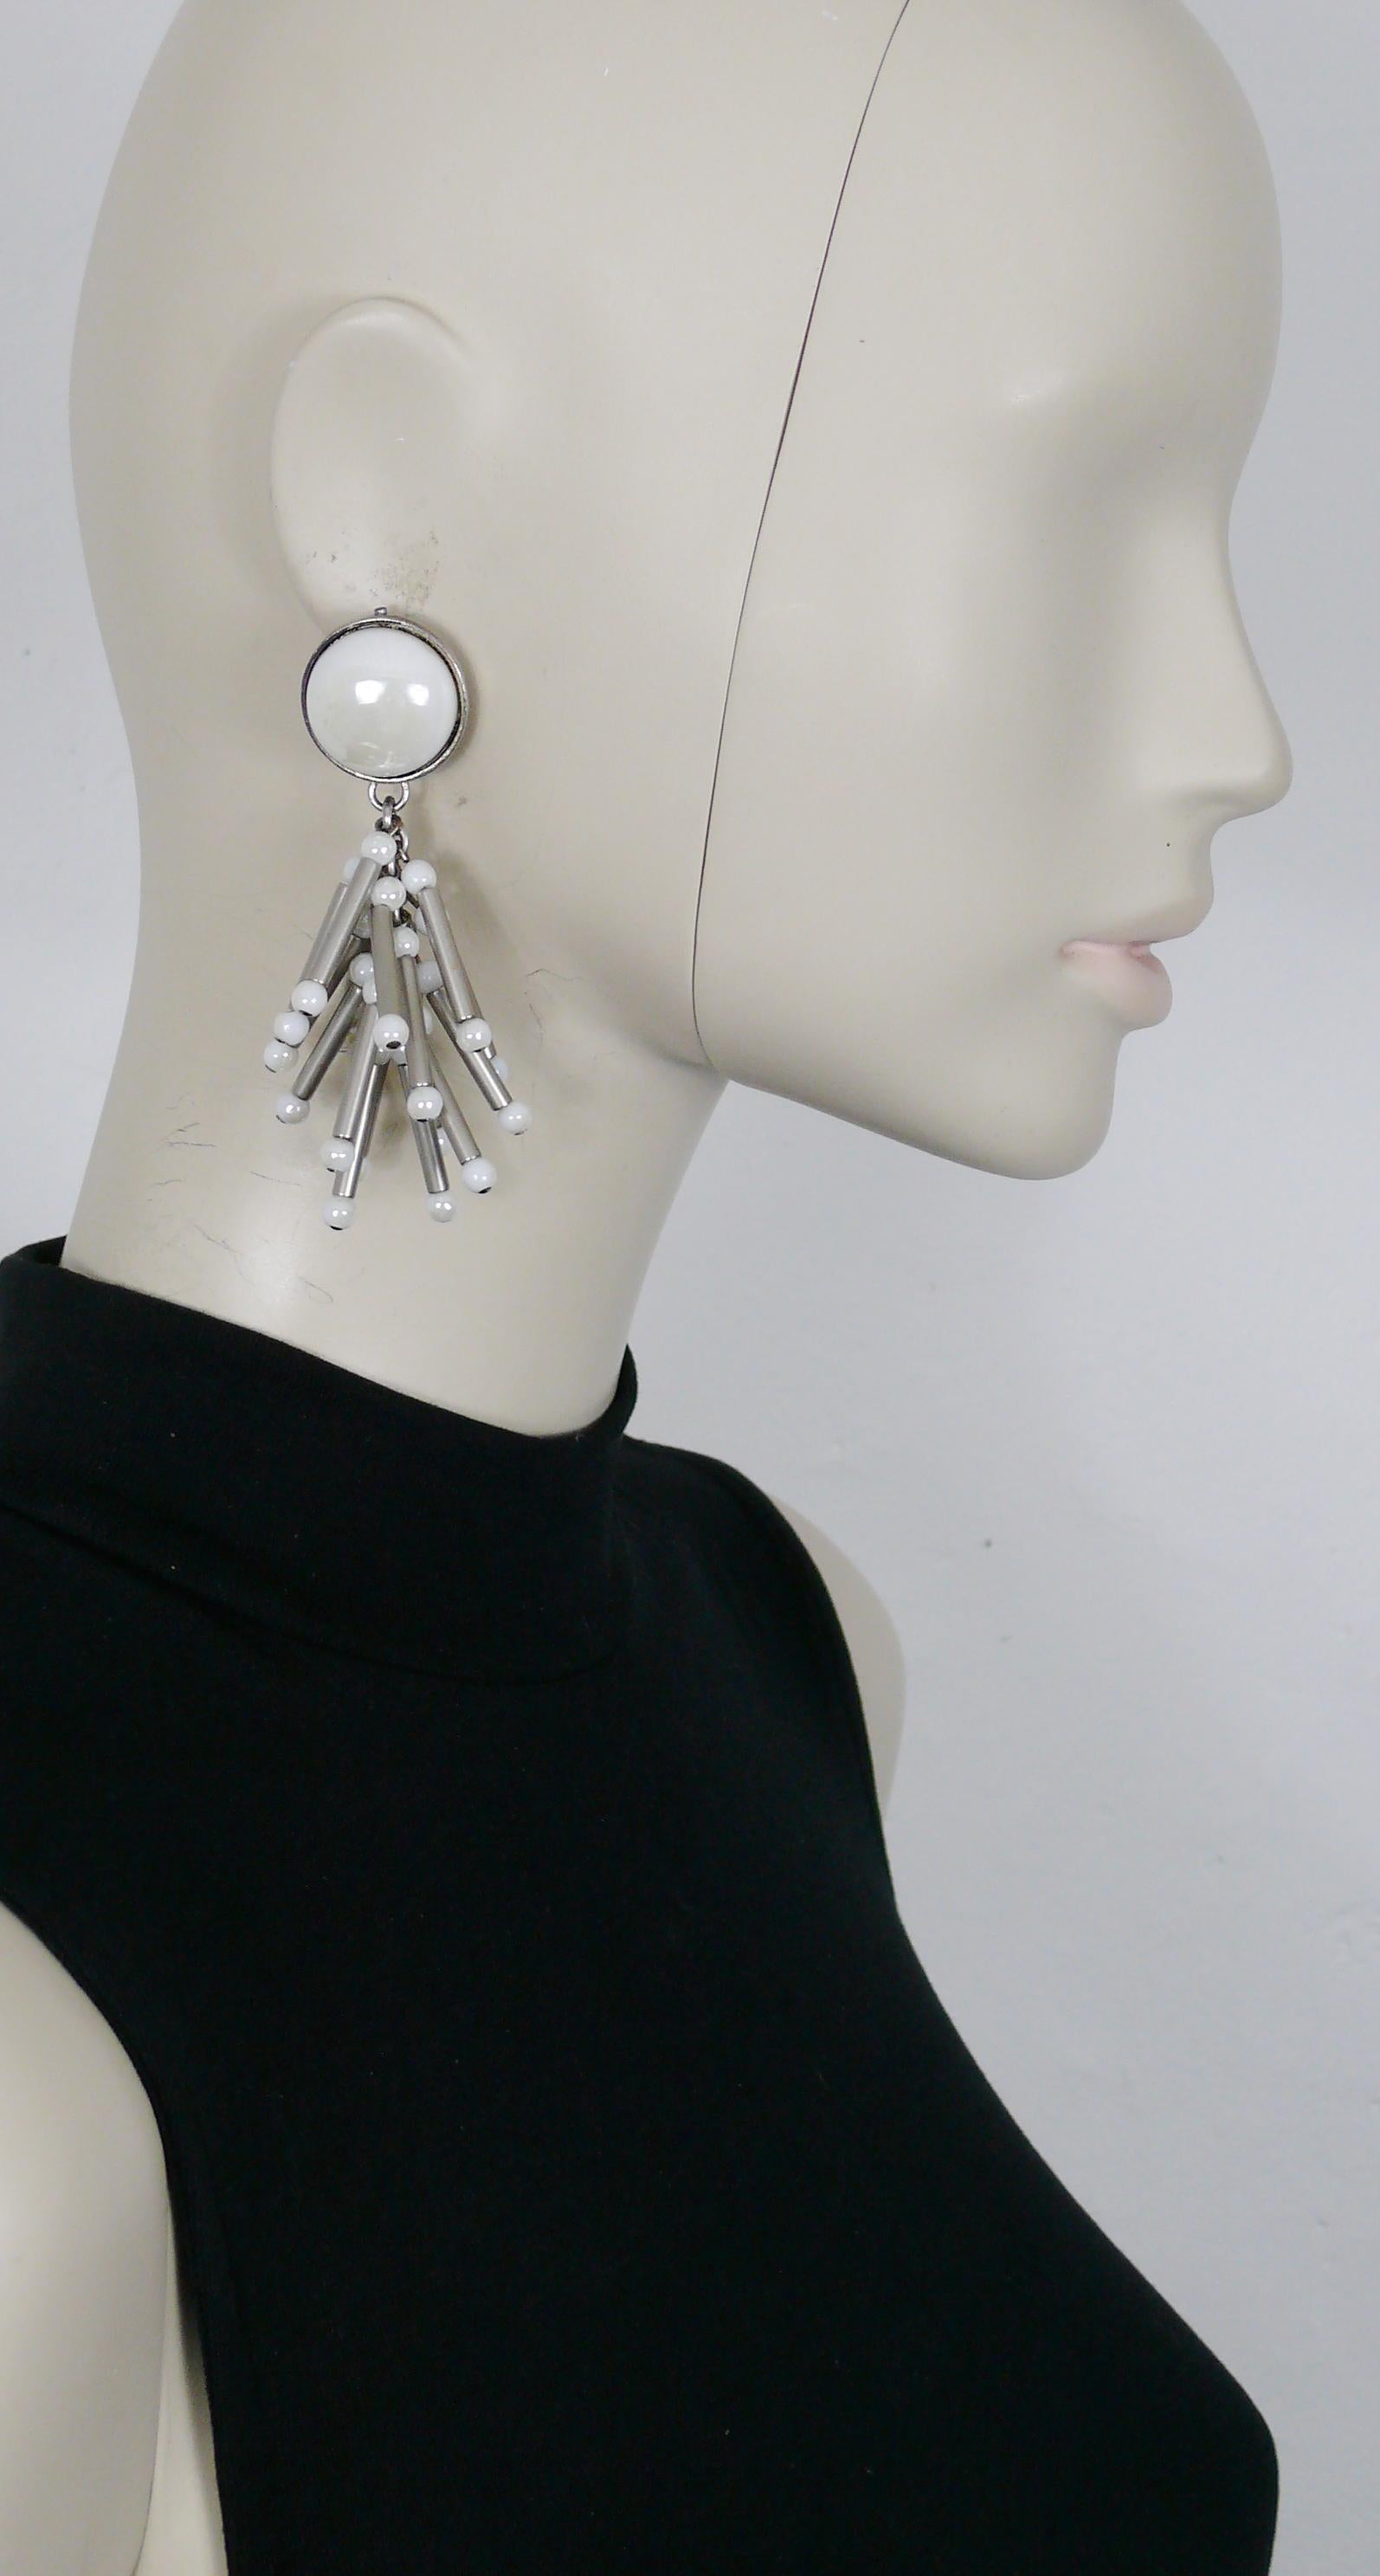 PACO RABANNE vintage antiqued silver toned dangling earrings (clip-on) featuring tubular charms embellished with white glass beads topped with a large white glass cabochon.

Silver tone metal hardware.
Antiqued patina.

Marked PACO RABANNE